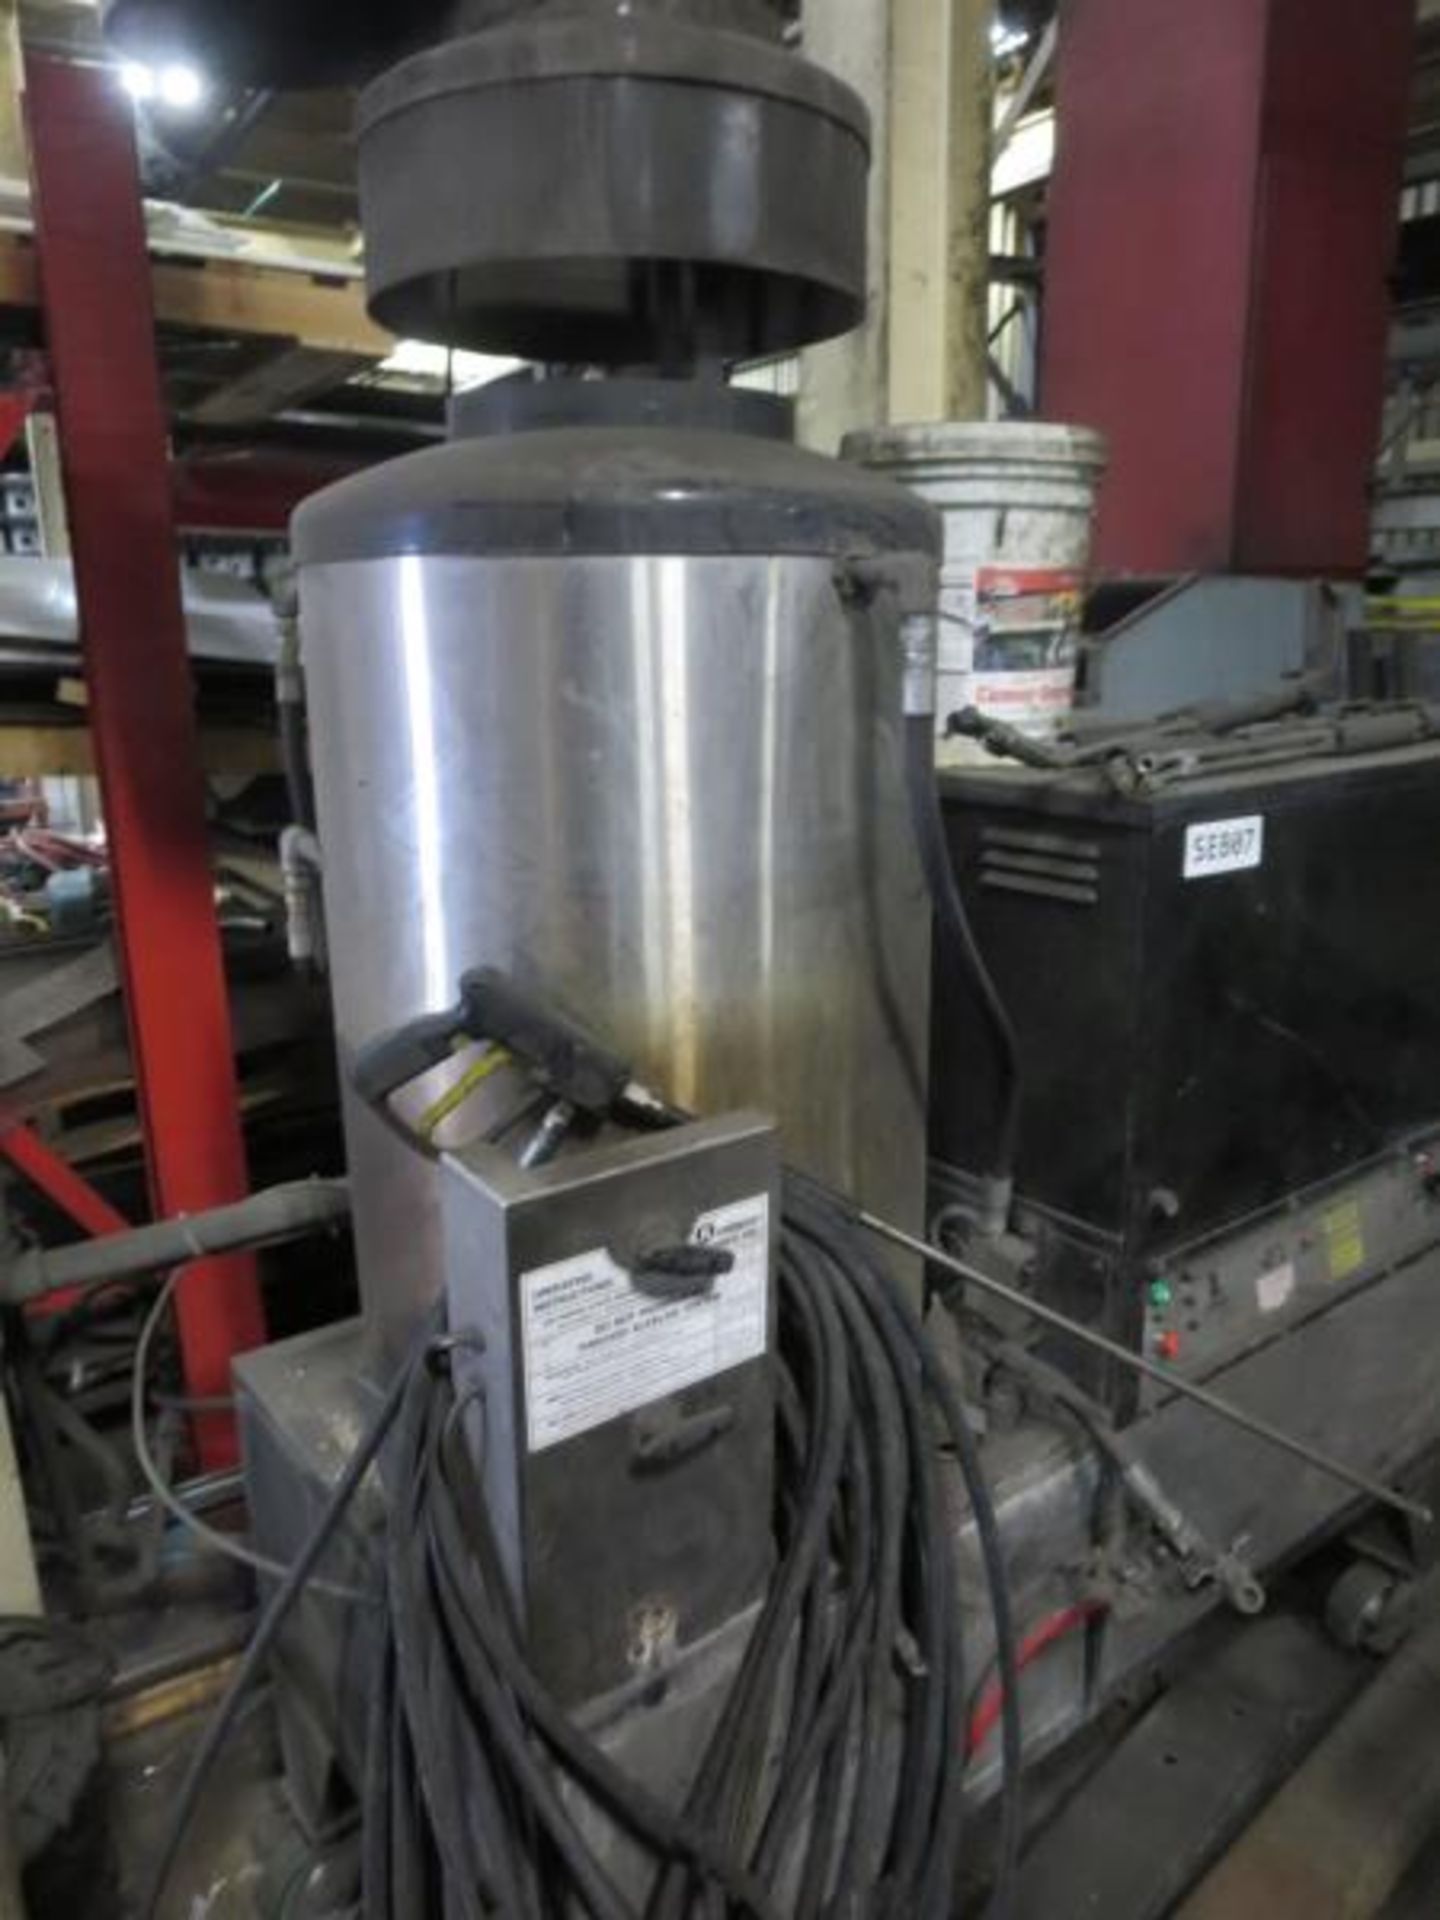 Fremont Phosphate Steam Cleaner, Approx. 3000psi. Hit # 2202974. Bldg. 1 O.S. Maint Shop. Asset - Image 5 of 8